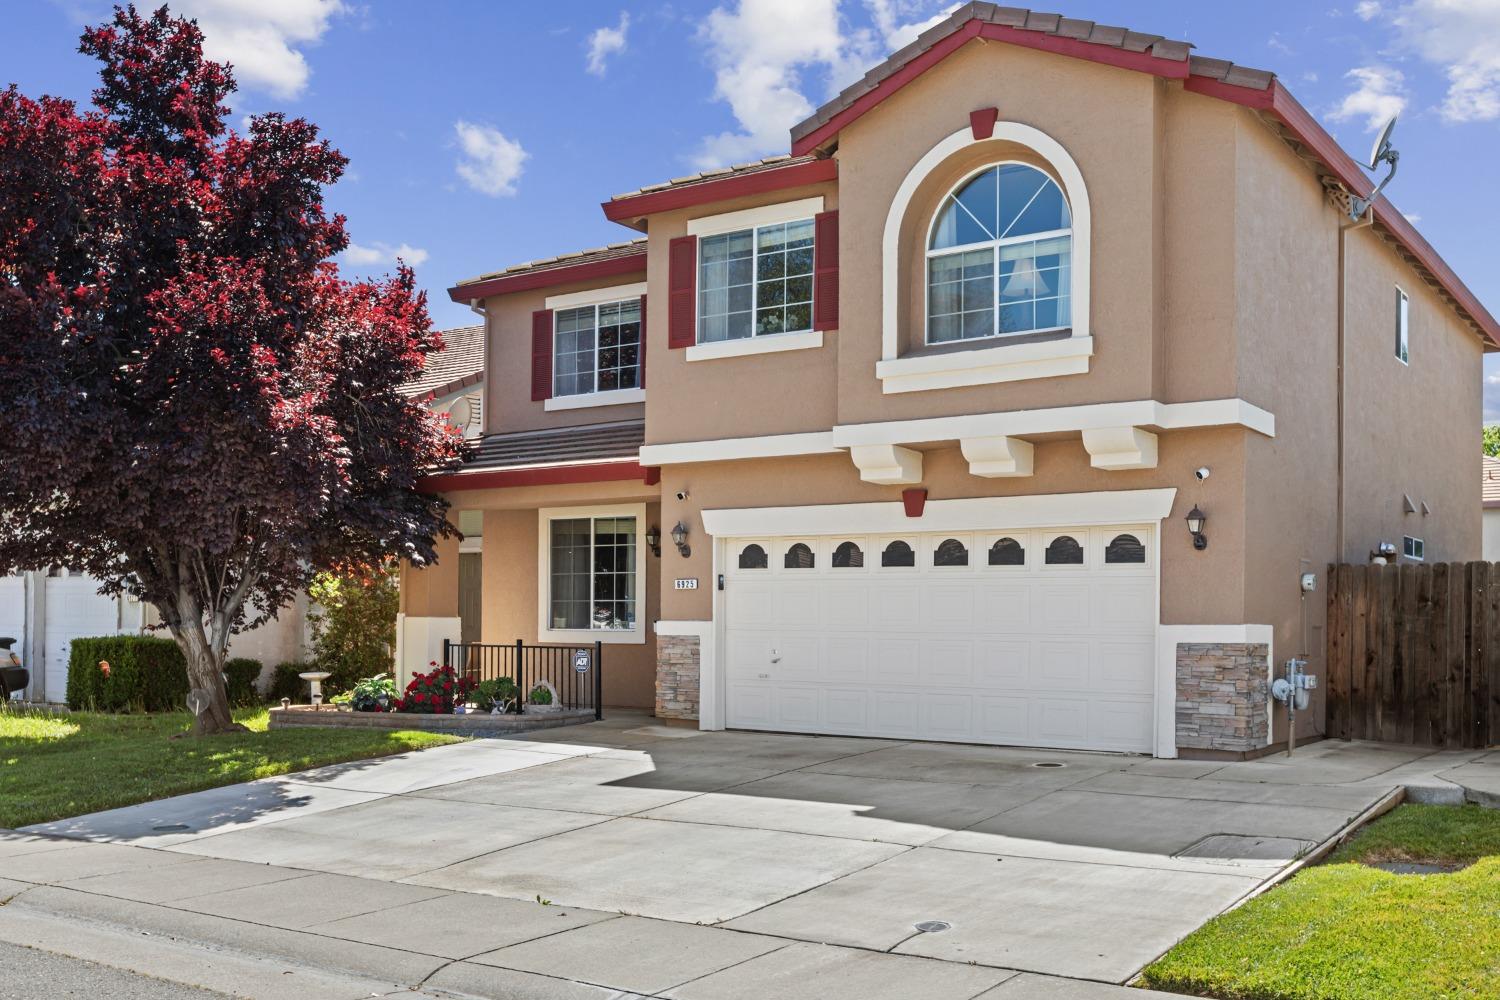 Photo of 6925 Saddle Horse Wy in Citrus Heights, CA